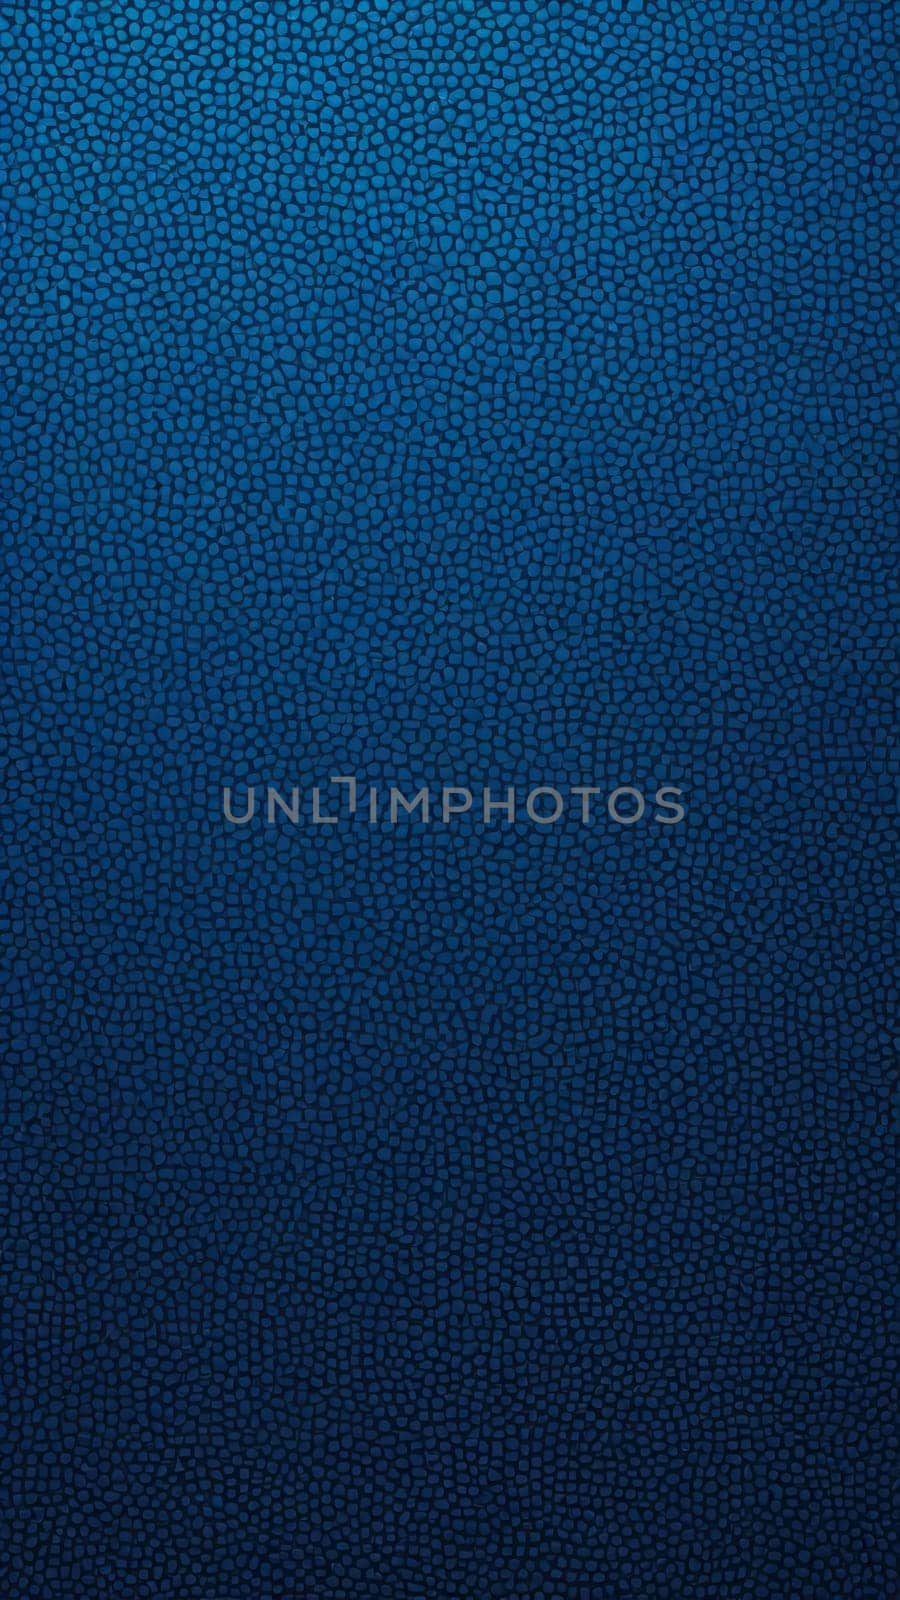 Screen background from Stippled shapes and navy by nkotlyar